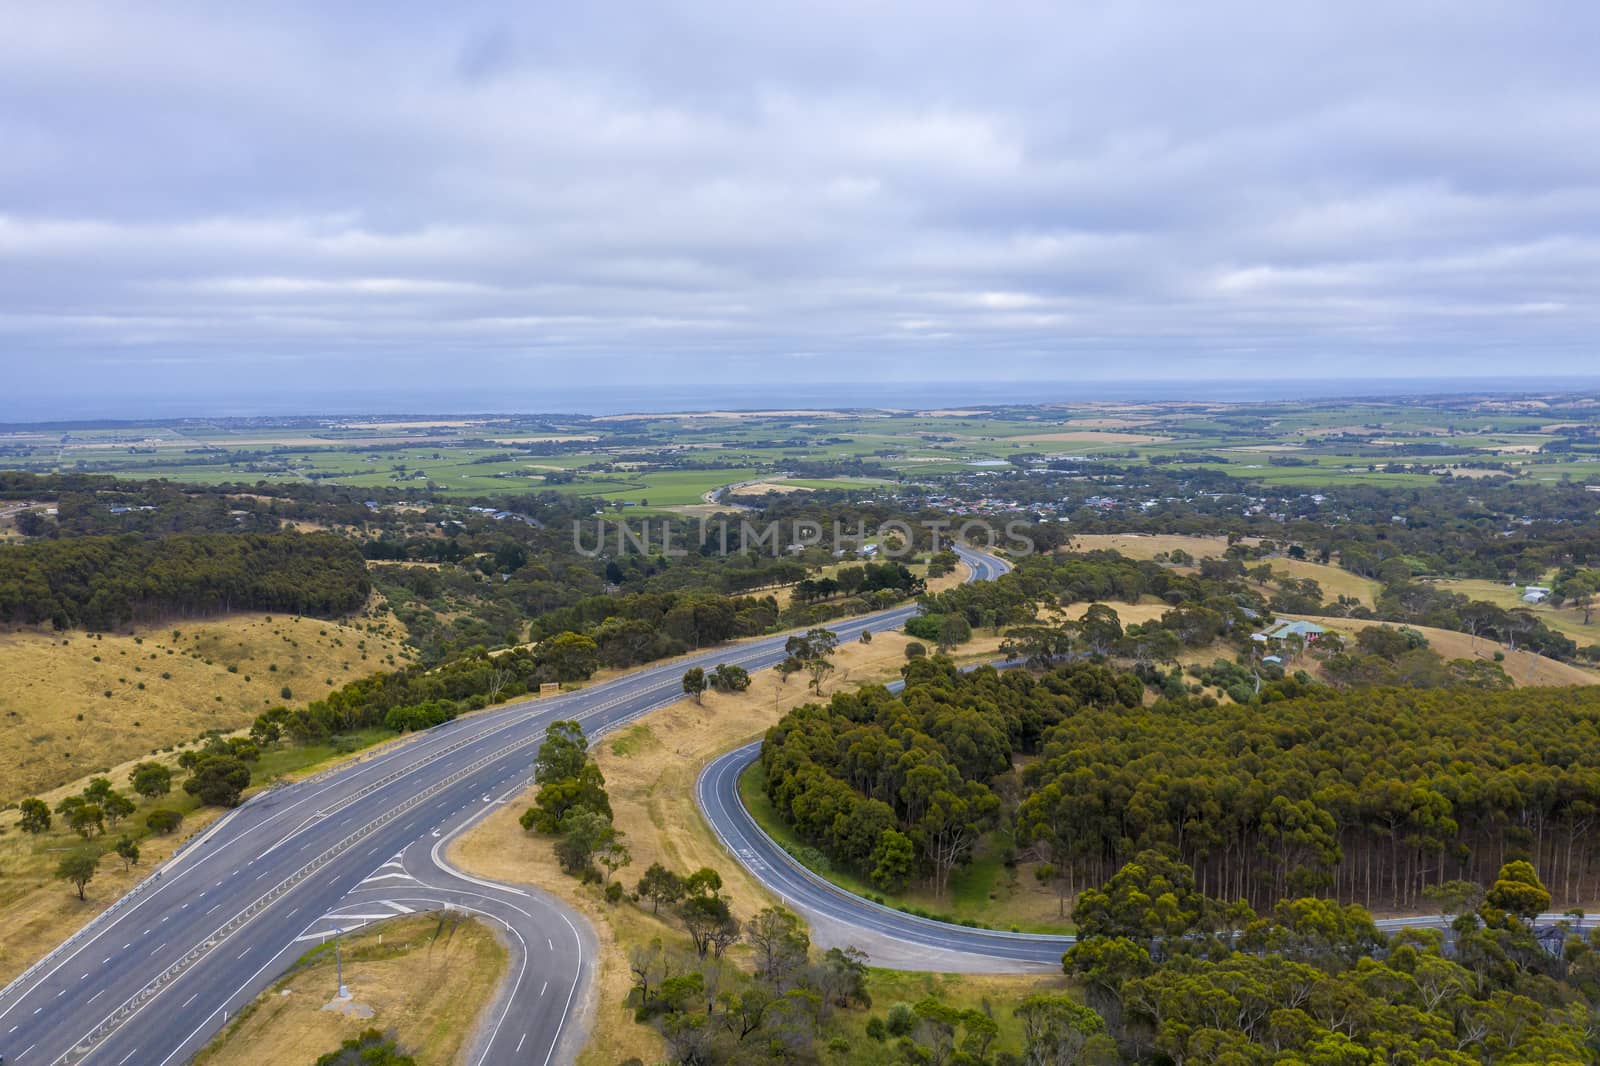 Aerial view of an arterial road system in regional Australia by WittkePhotos